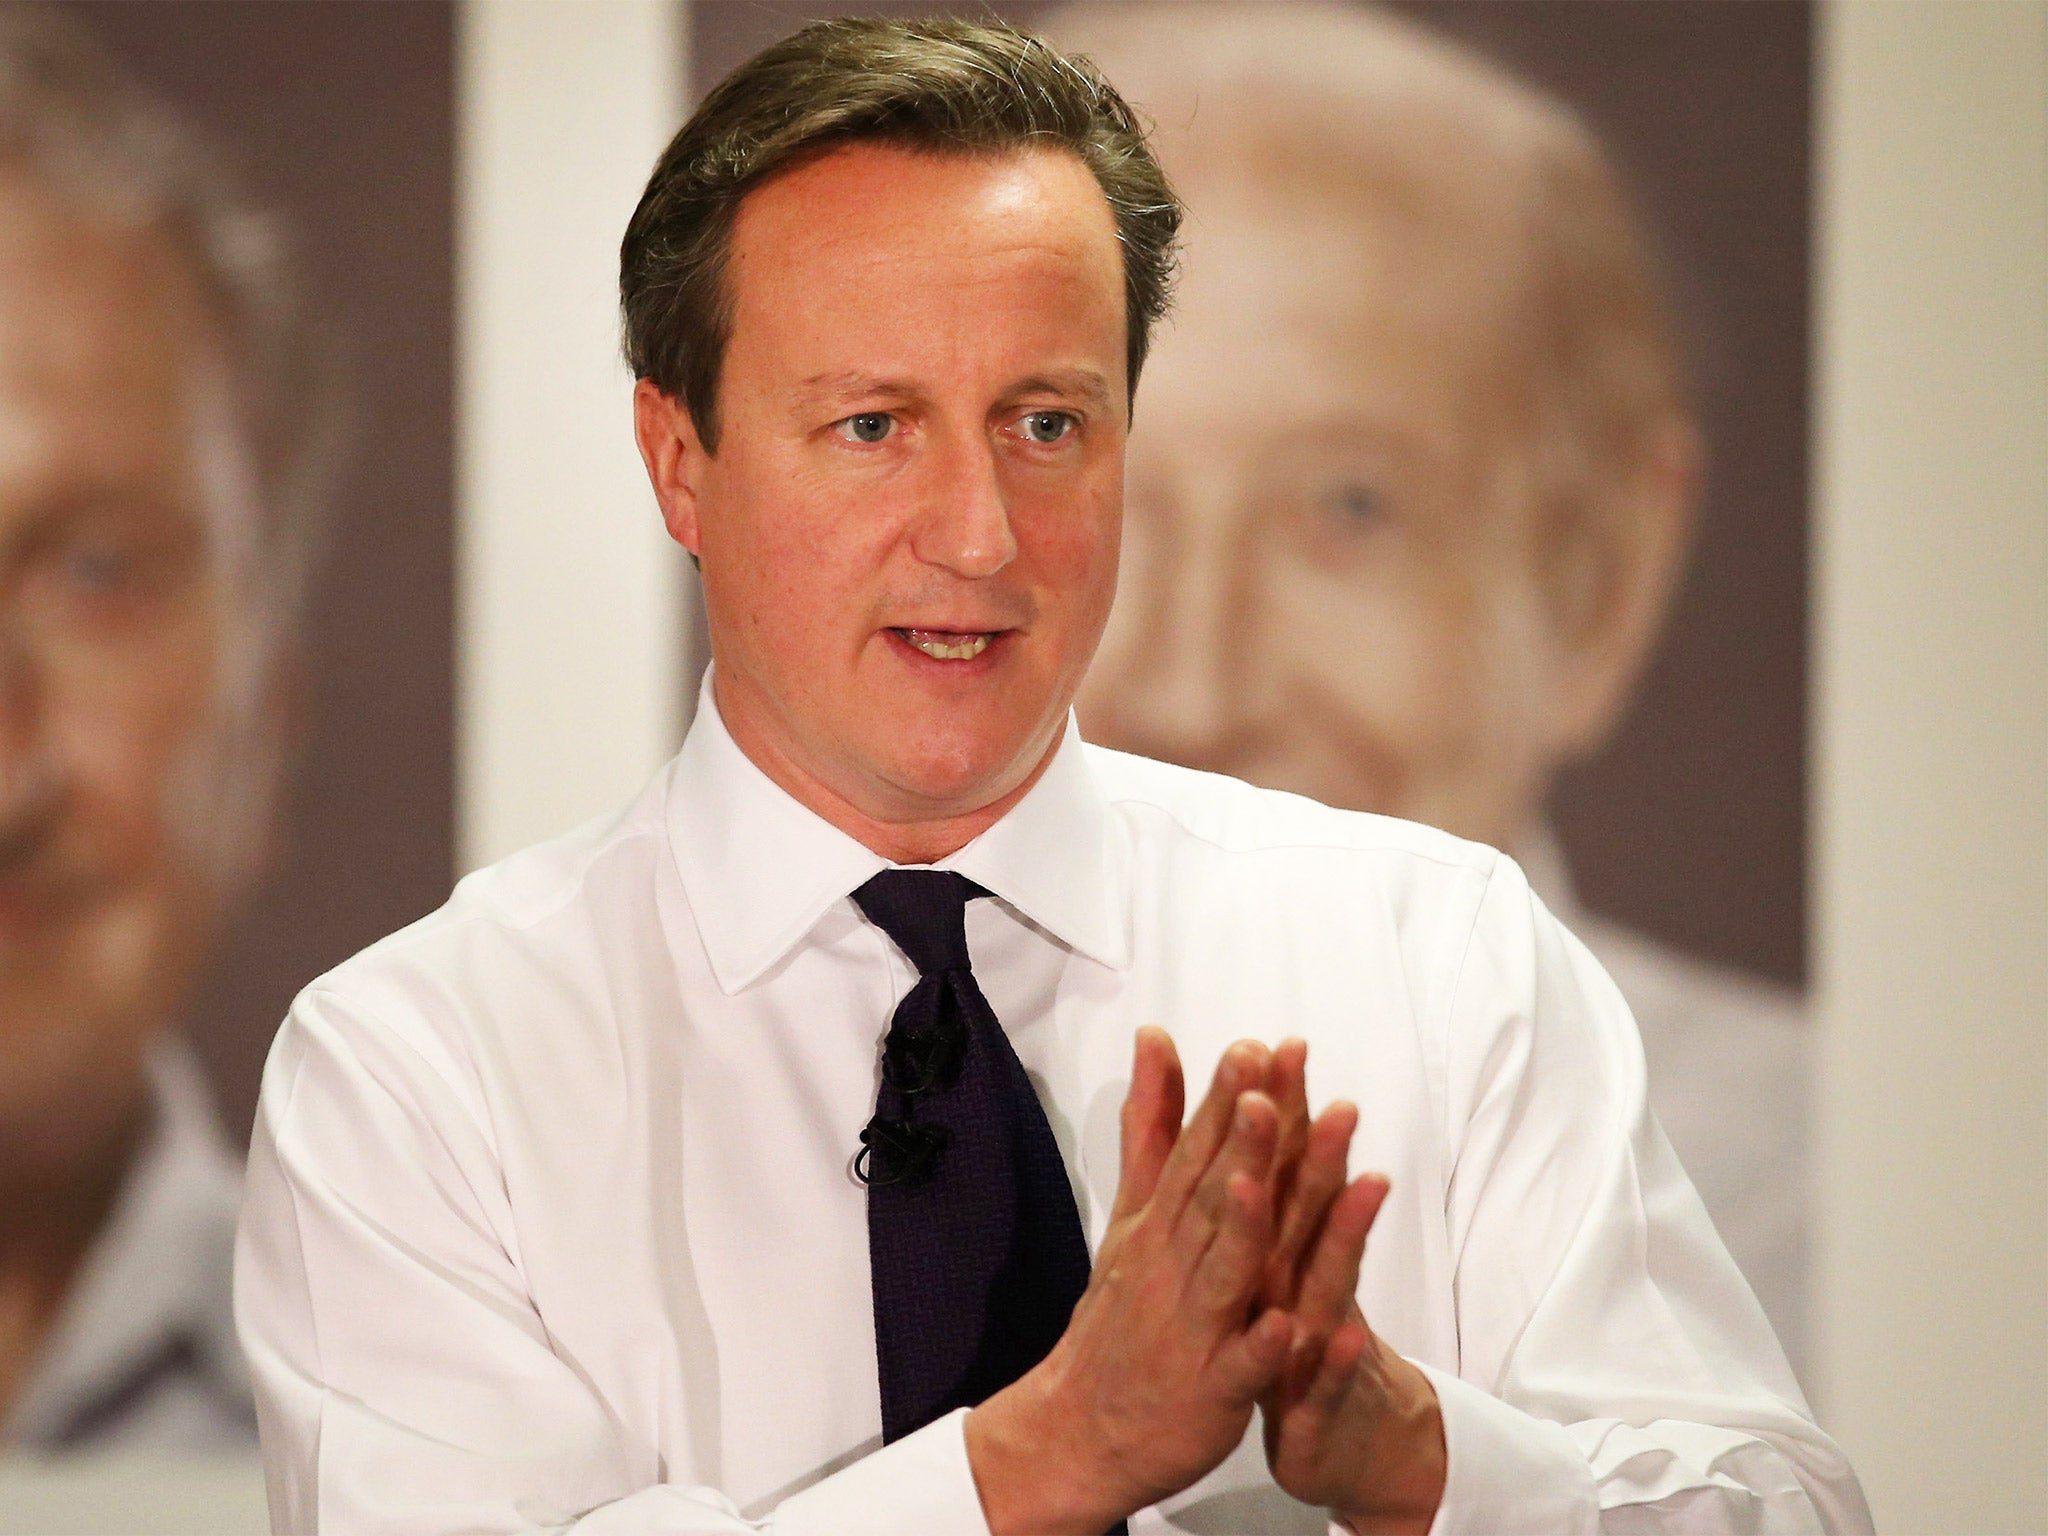 Cameron vows to 'confront the menace of extremism' in UK charity sector